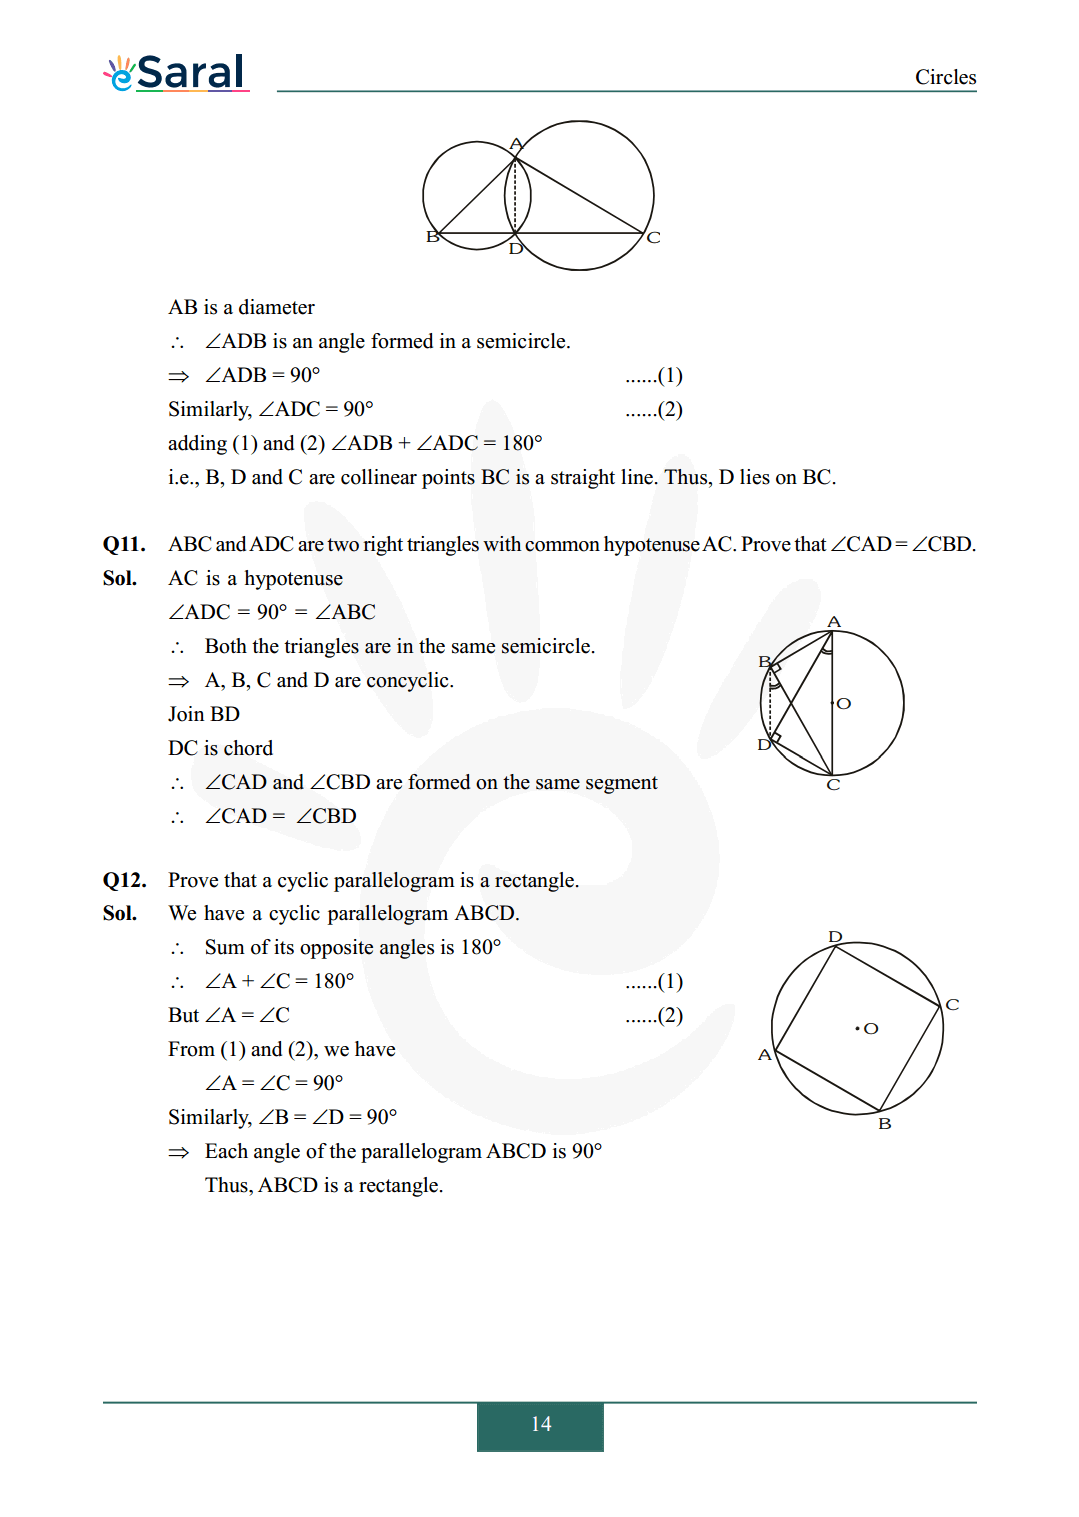 Class 9 maths chapter 10 exercise 10.5 solutions Image 6